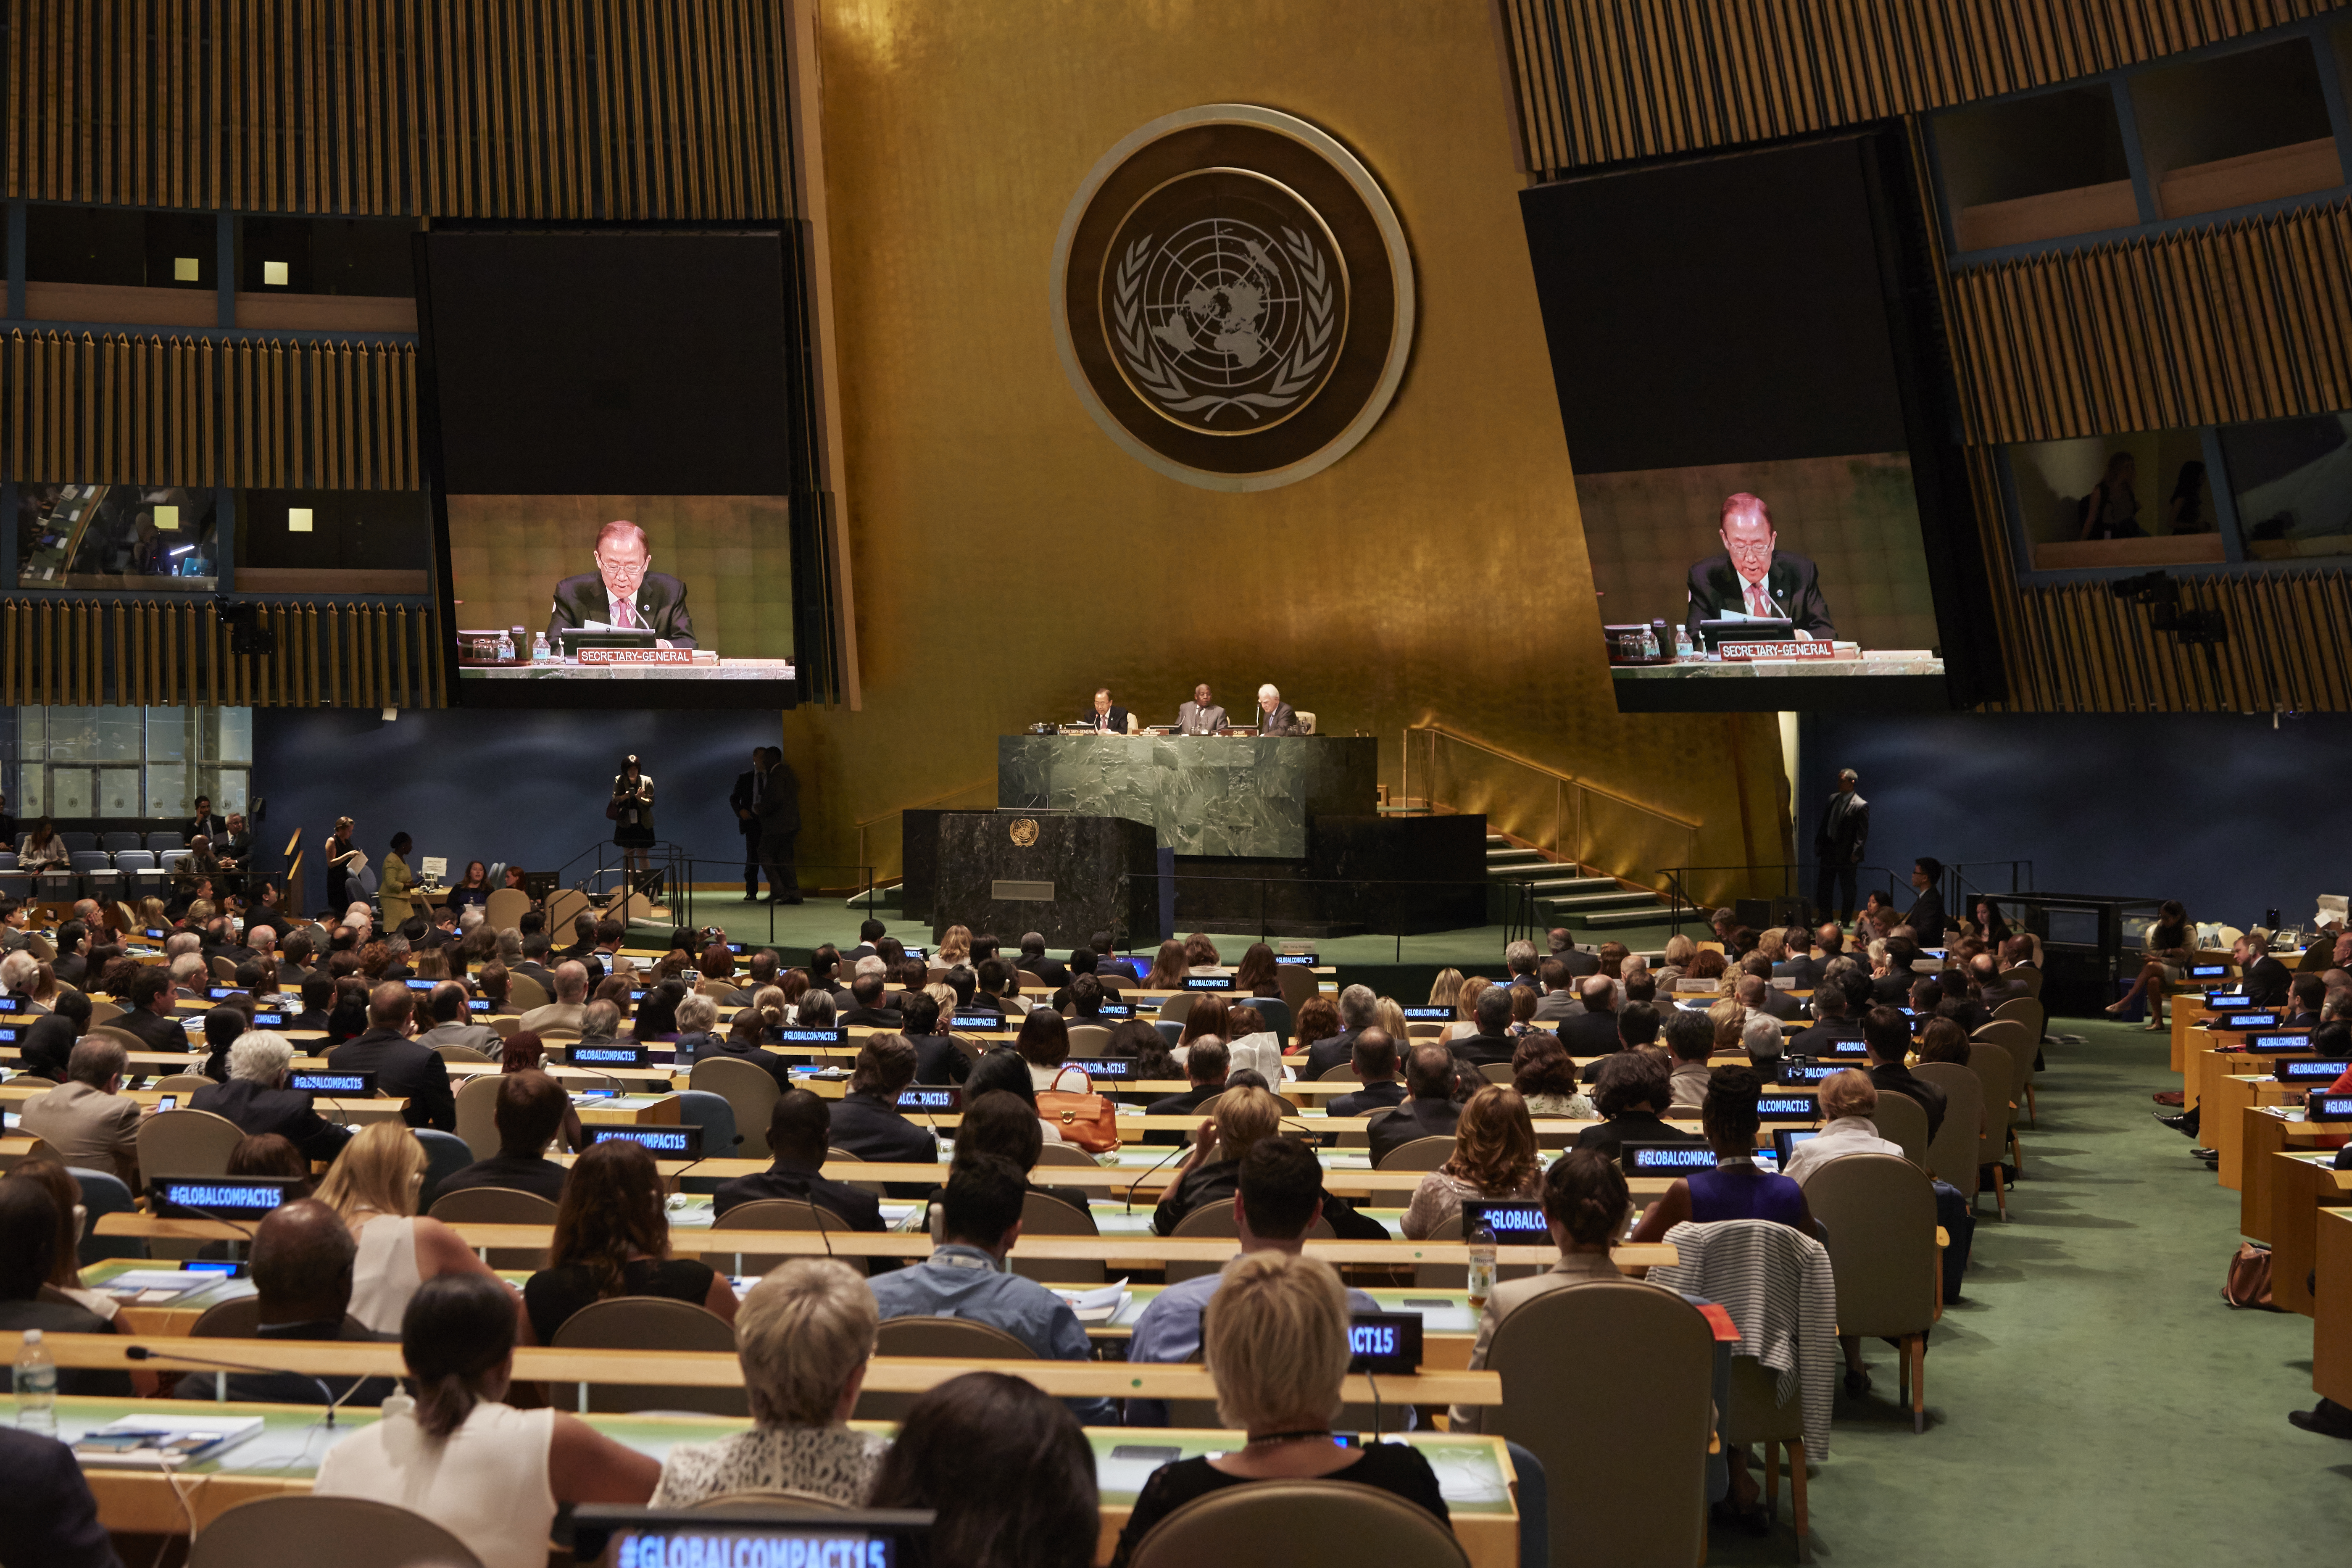 Photographs from the UN Global Compact meeting 2015